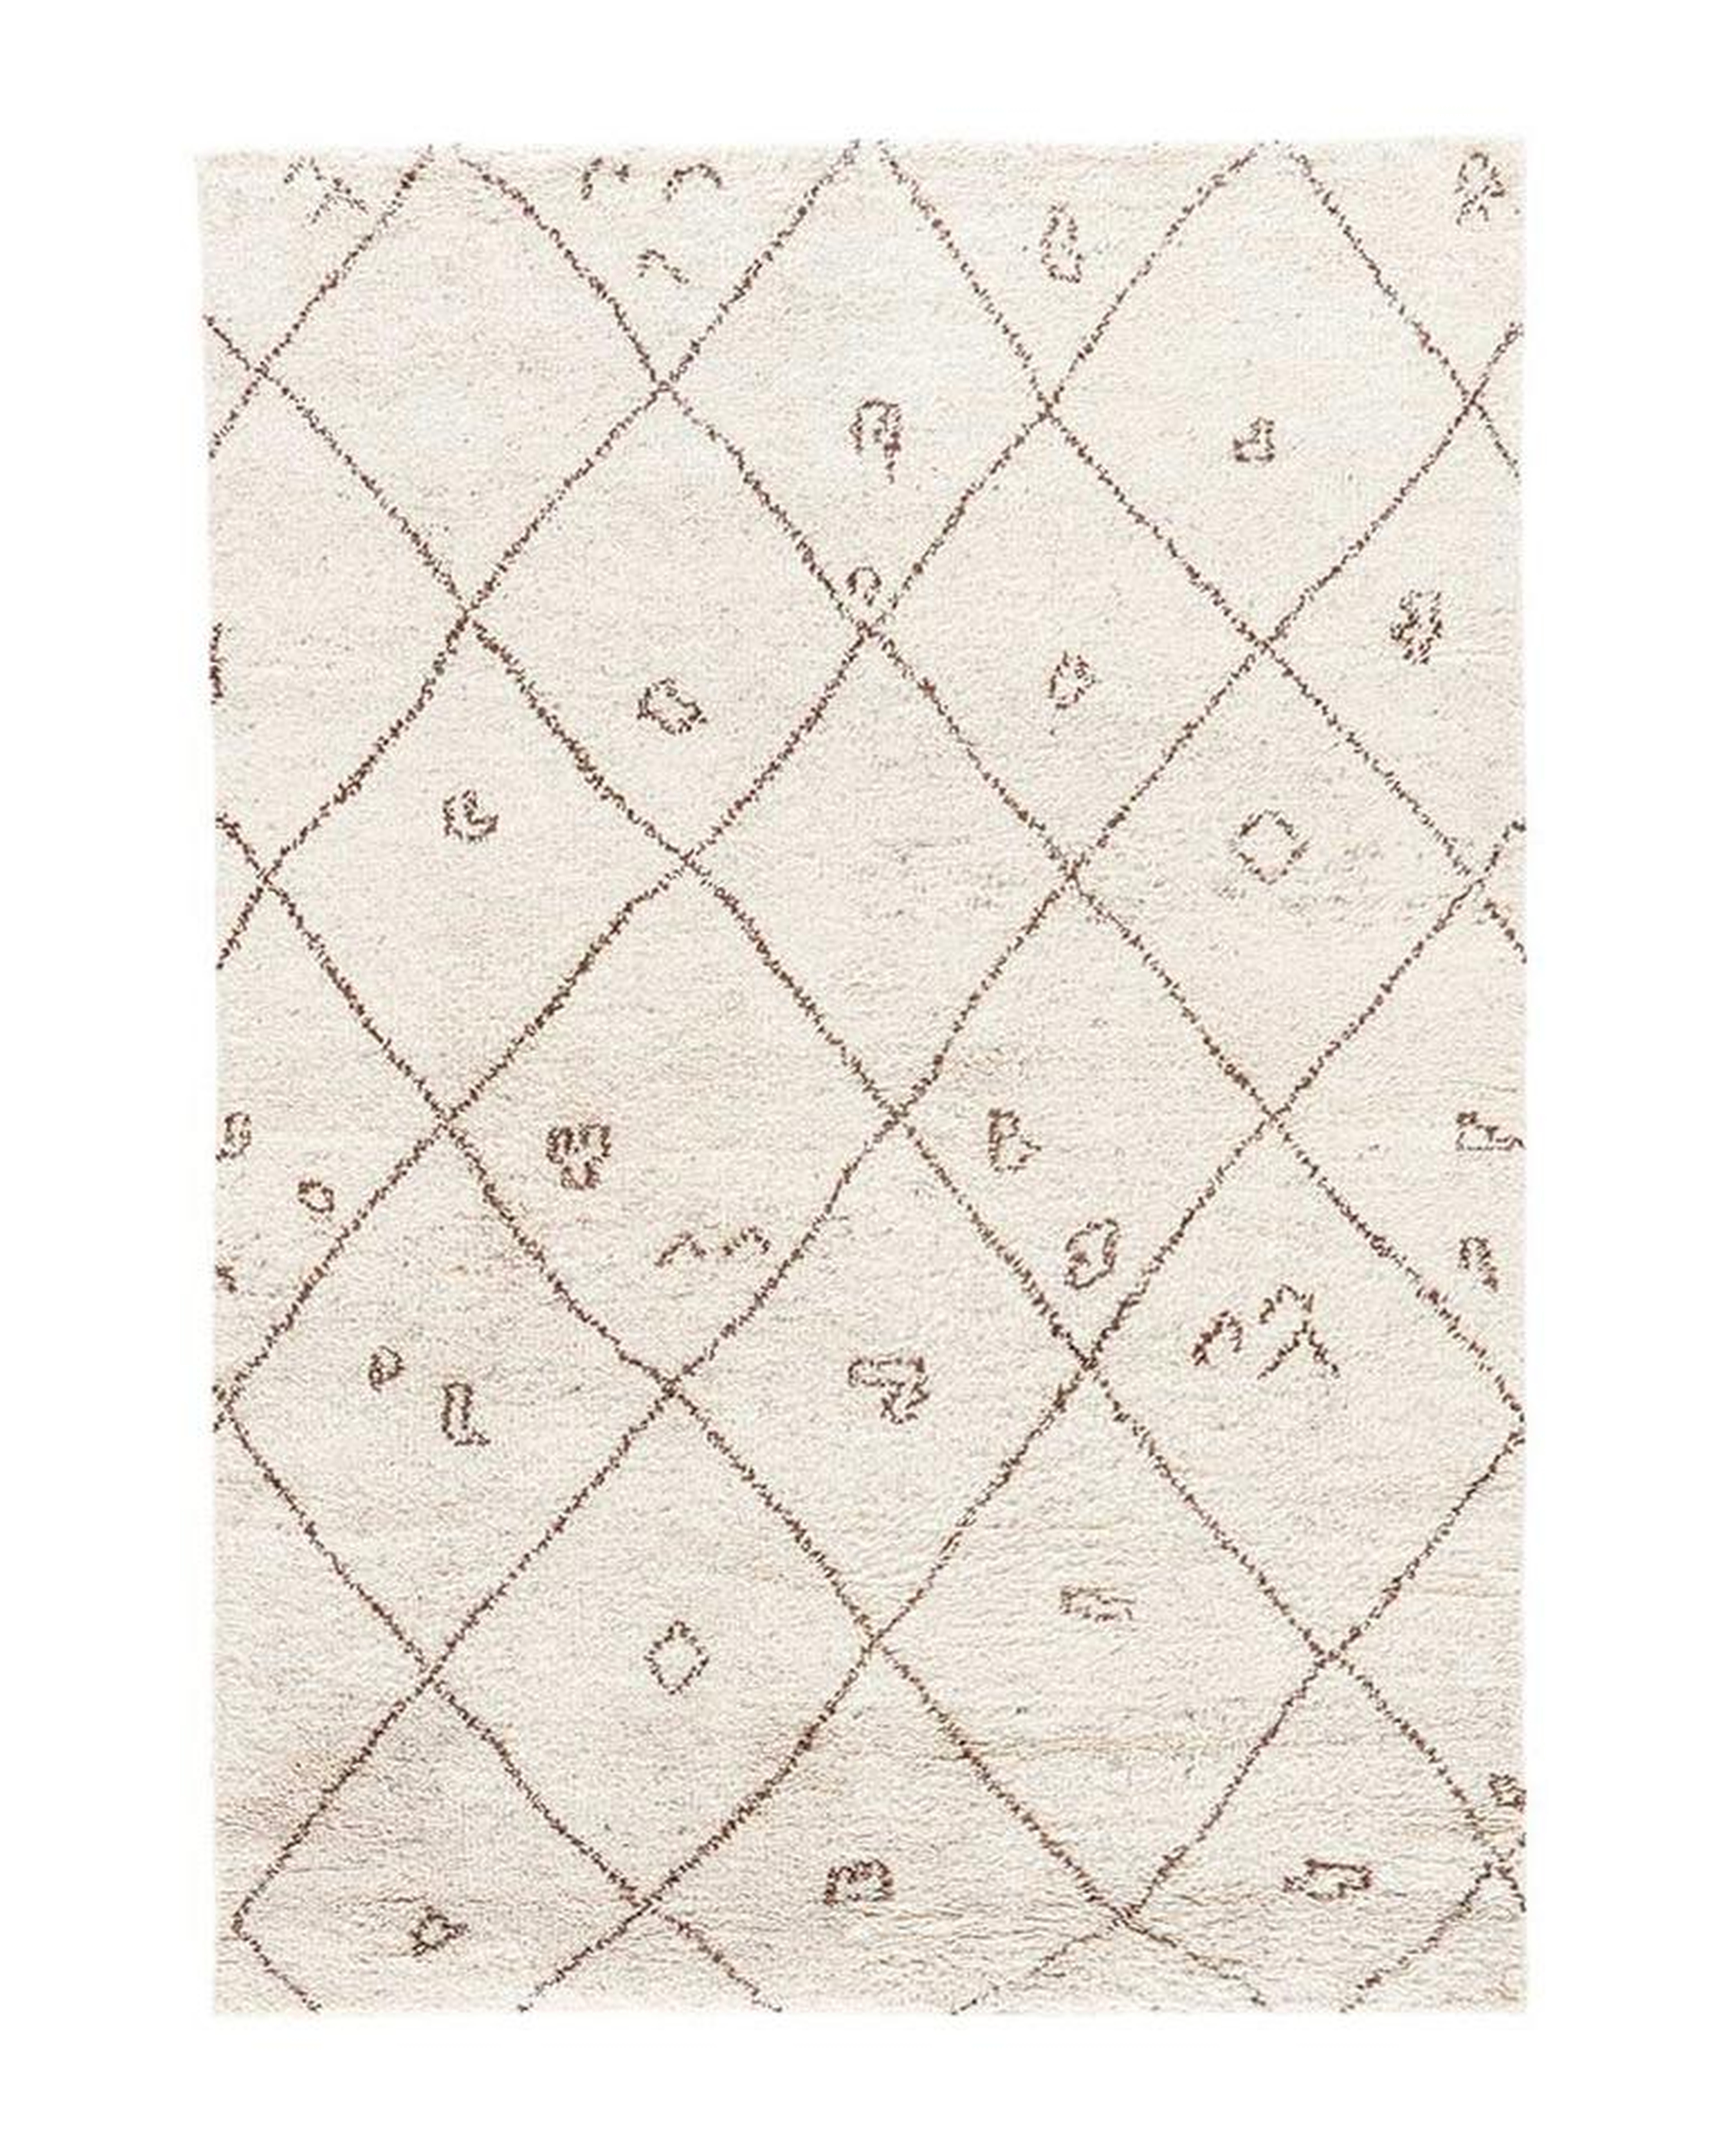 SAN DIEGO HAND-KNOTTED WOOL RUG, 7'10" x 10'10" - McGee & Co.